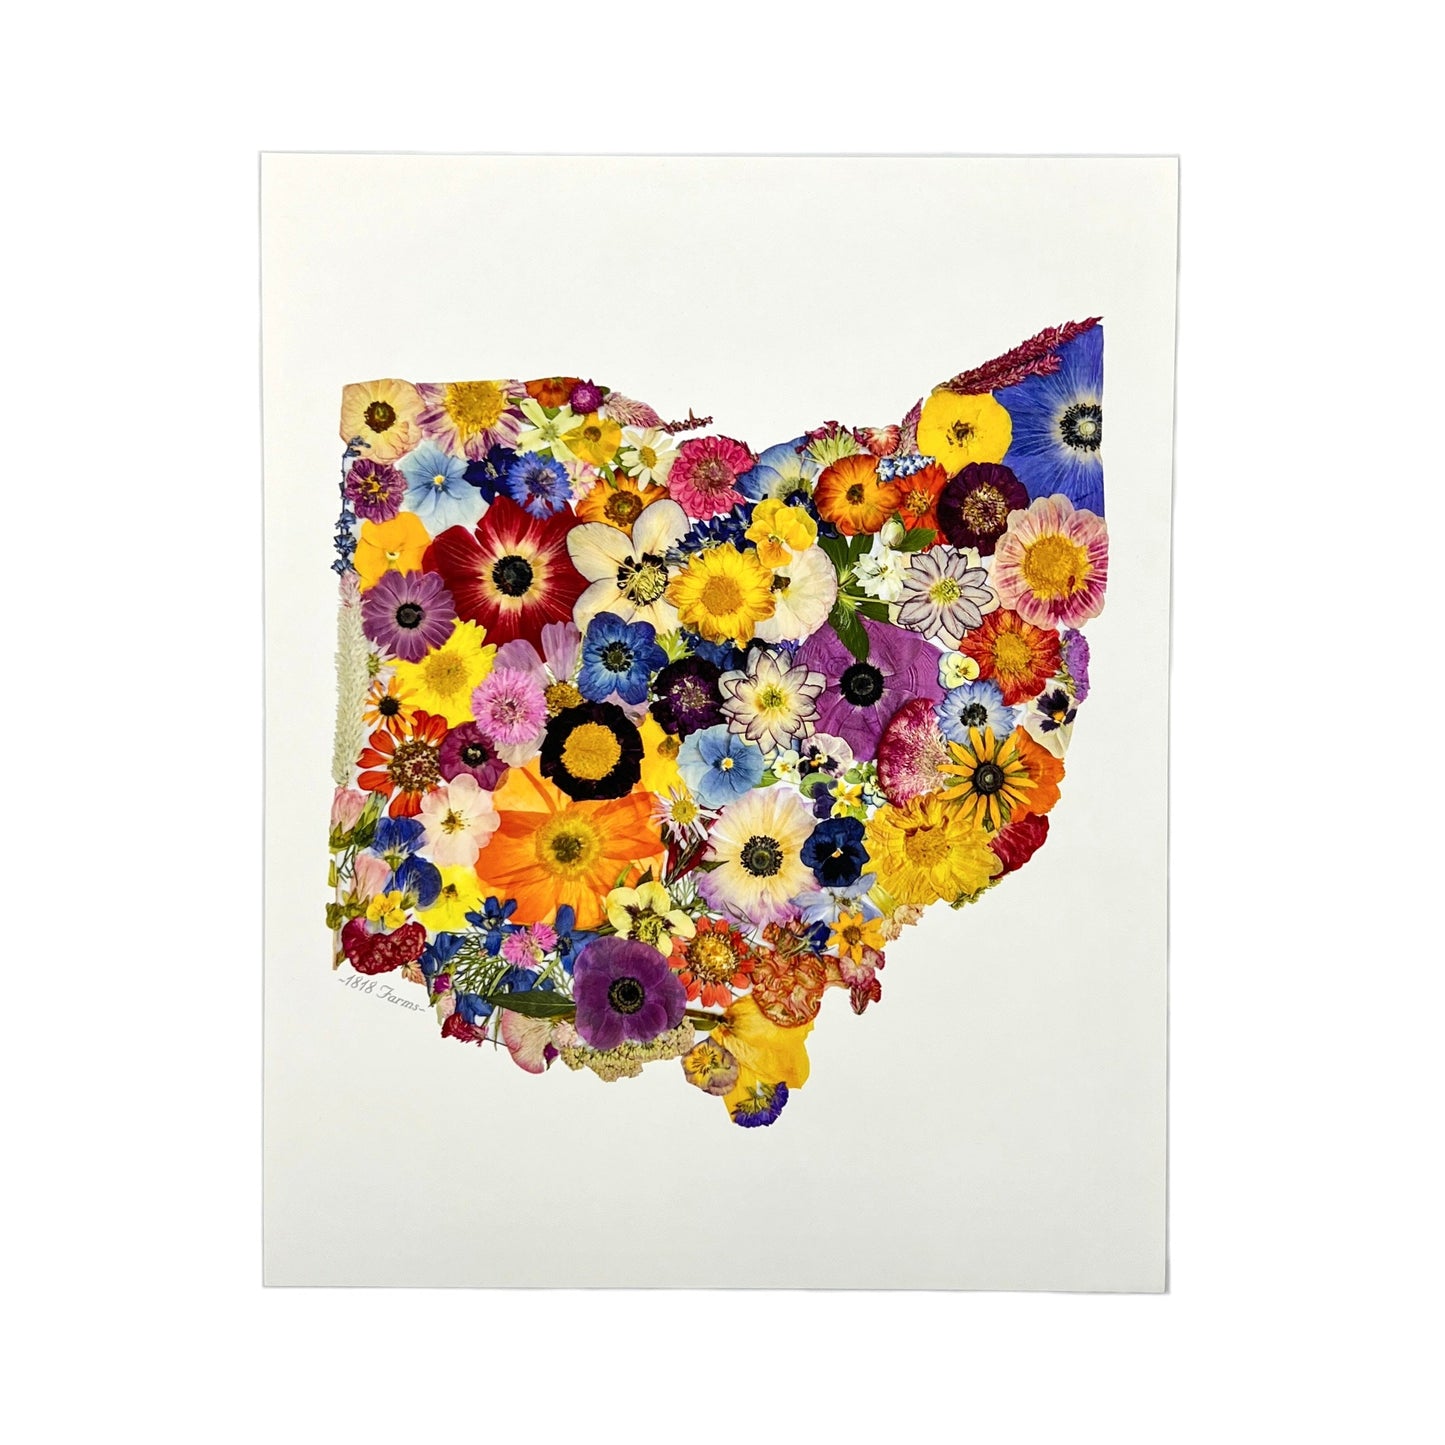 State Themed Giclée Print  - "Where I Bloom" Collection Giclee Art Print 1818 Farms 8"x10" Ohio 